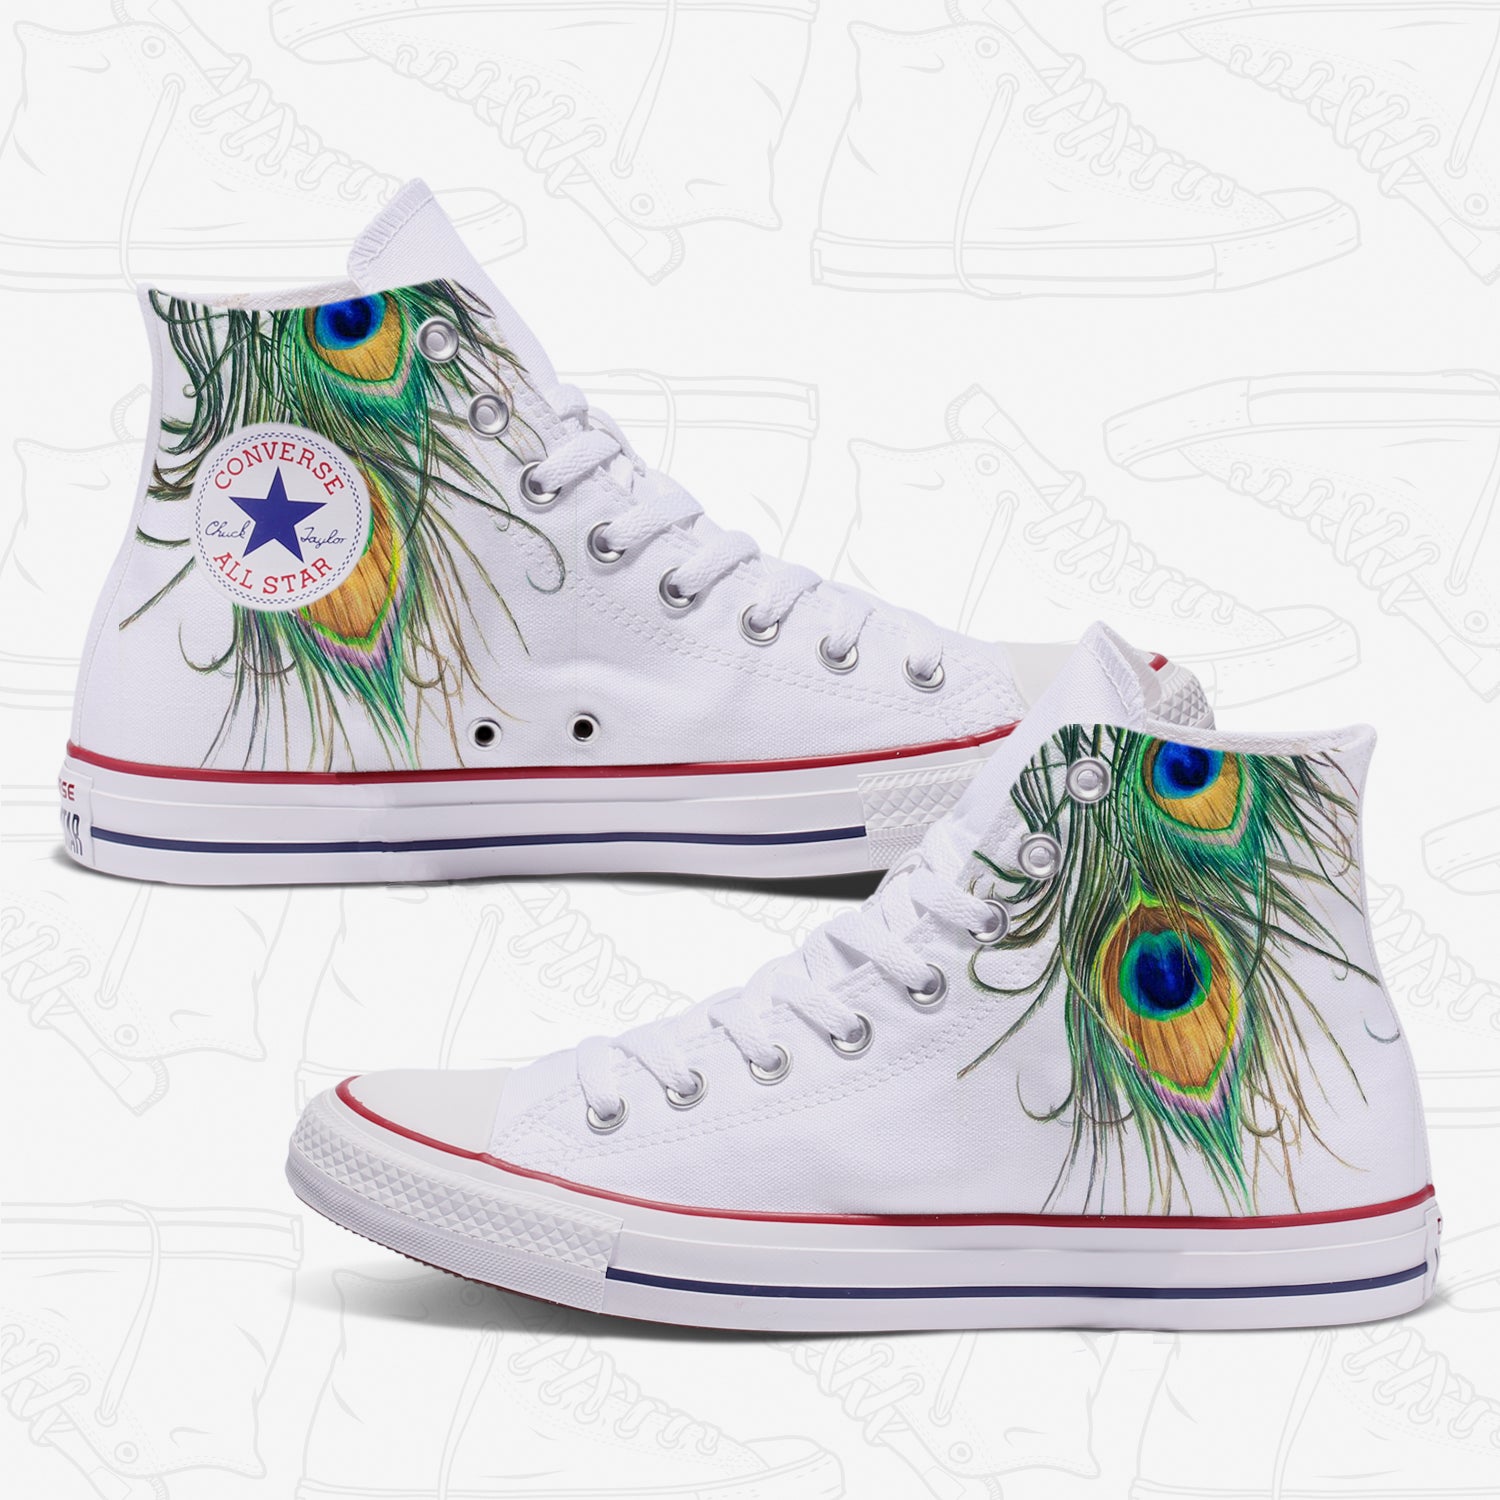 Peacock Feathers Adult Converse Shoes